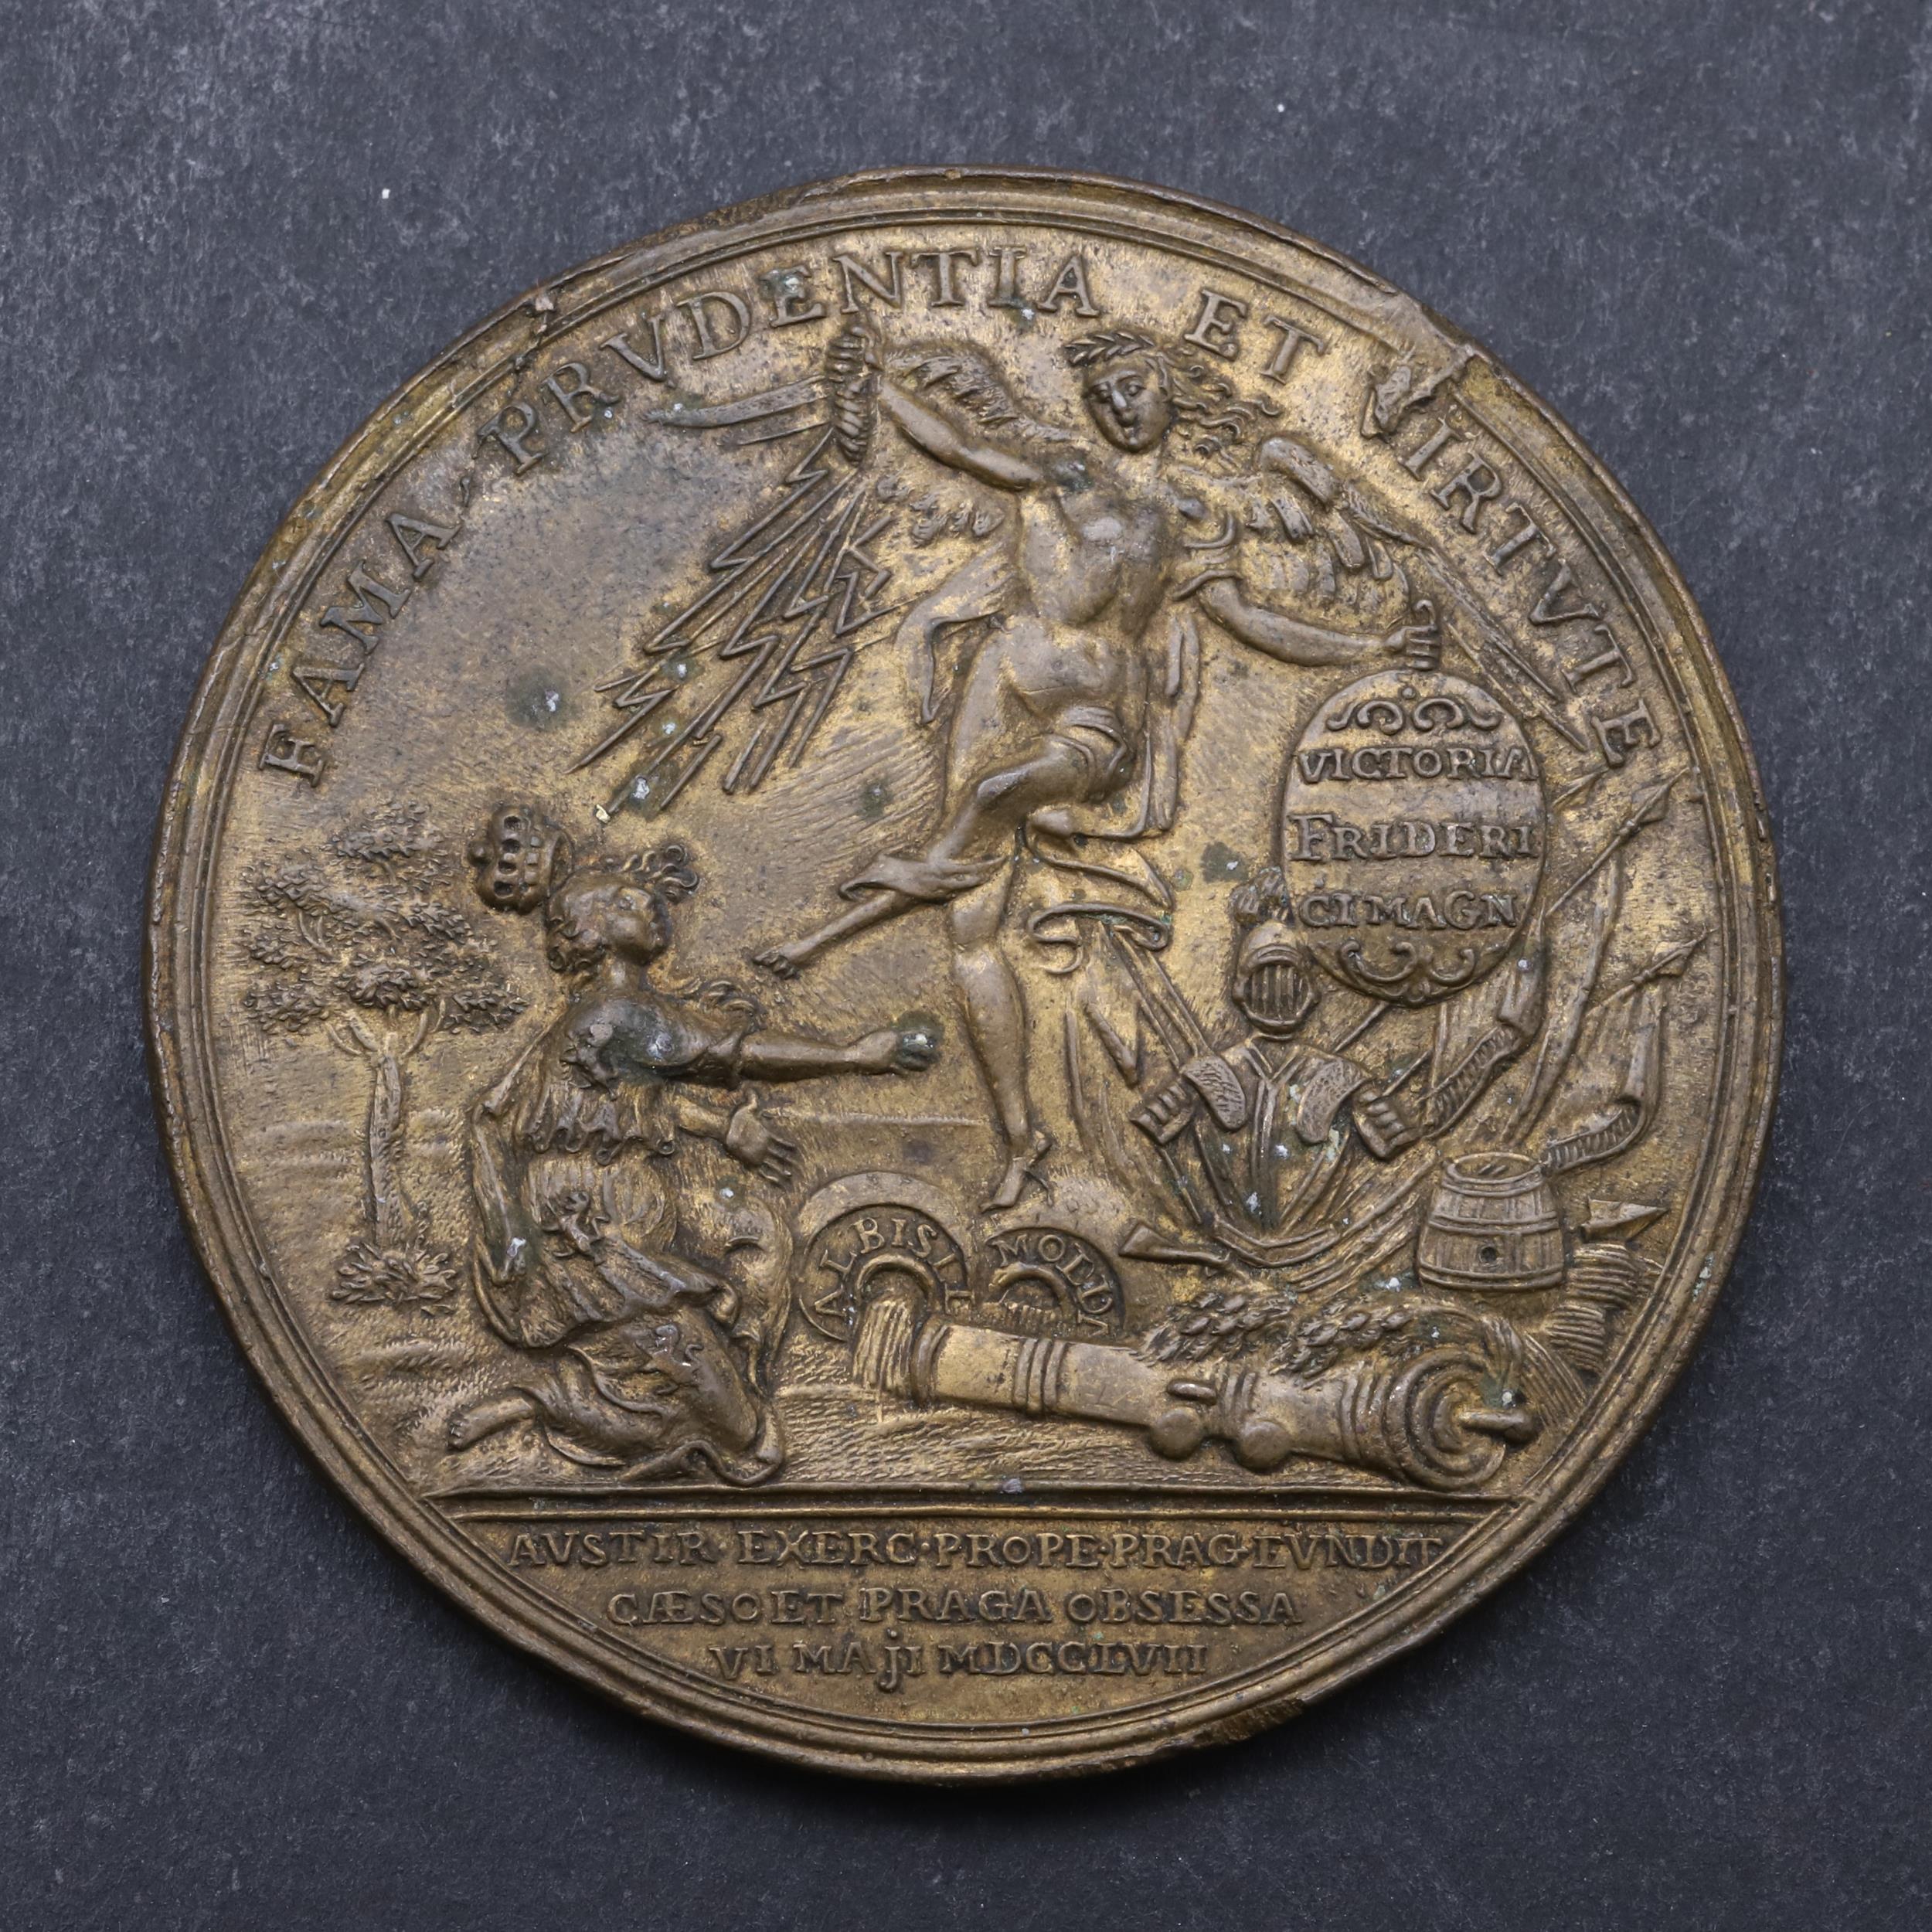 AN HISTORIC MEDAL MARKING THE CAPTURE OF PRAGUE, 1791 BY J.G. HOLTZHEY. - Image 2 of 3